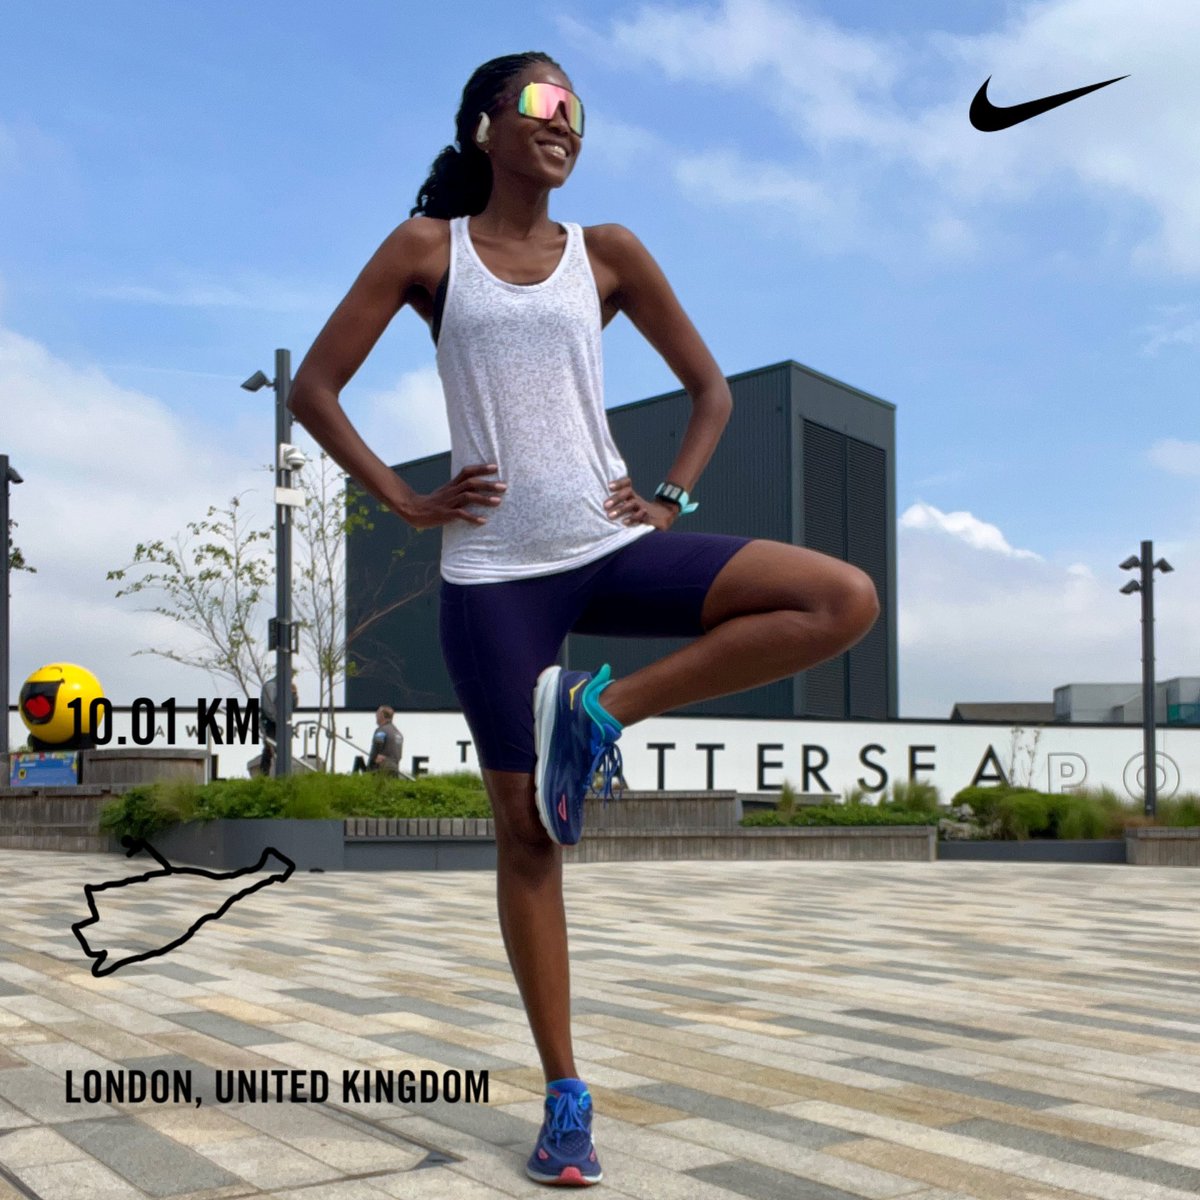 A happy Workers Day to abasebenzi! Birthday month opened, consistency & small improvements is all I strive for. Dealing with my 1st hayfever attack, nose & throat on fire #runningwithsoleac #runningwithtumisole #MayDay #socialrunner #londonrunning #solorunner #nikerunning #nrc